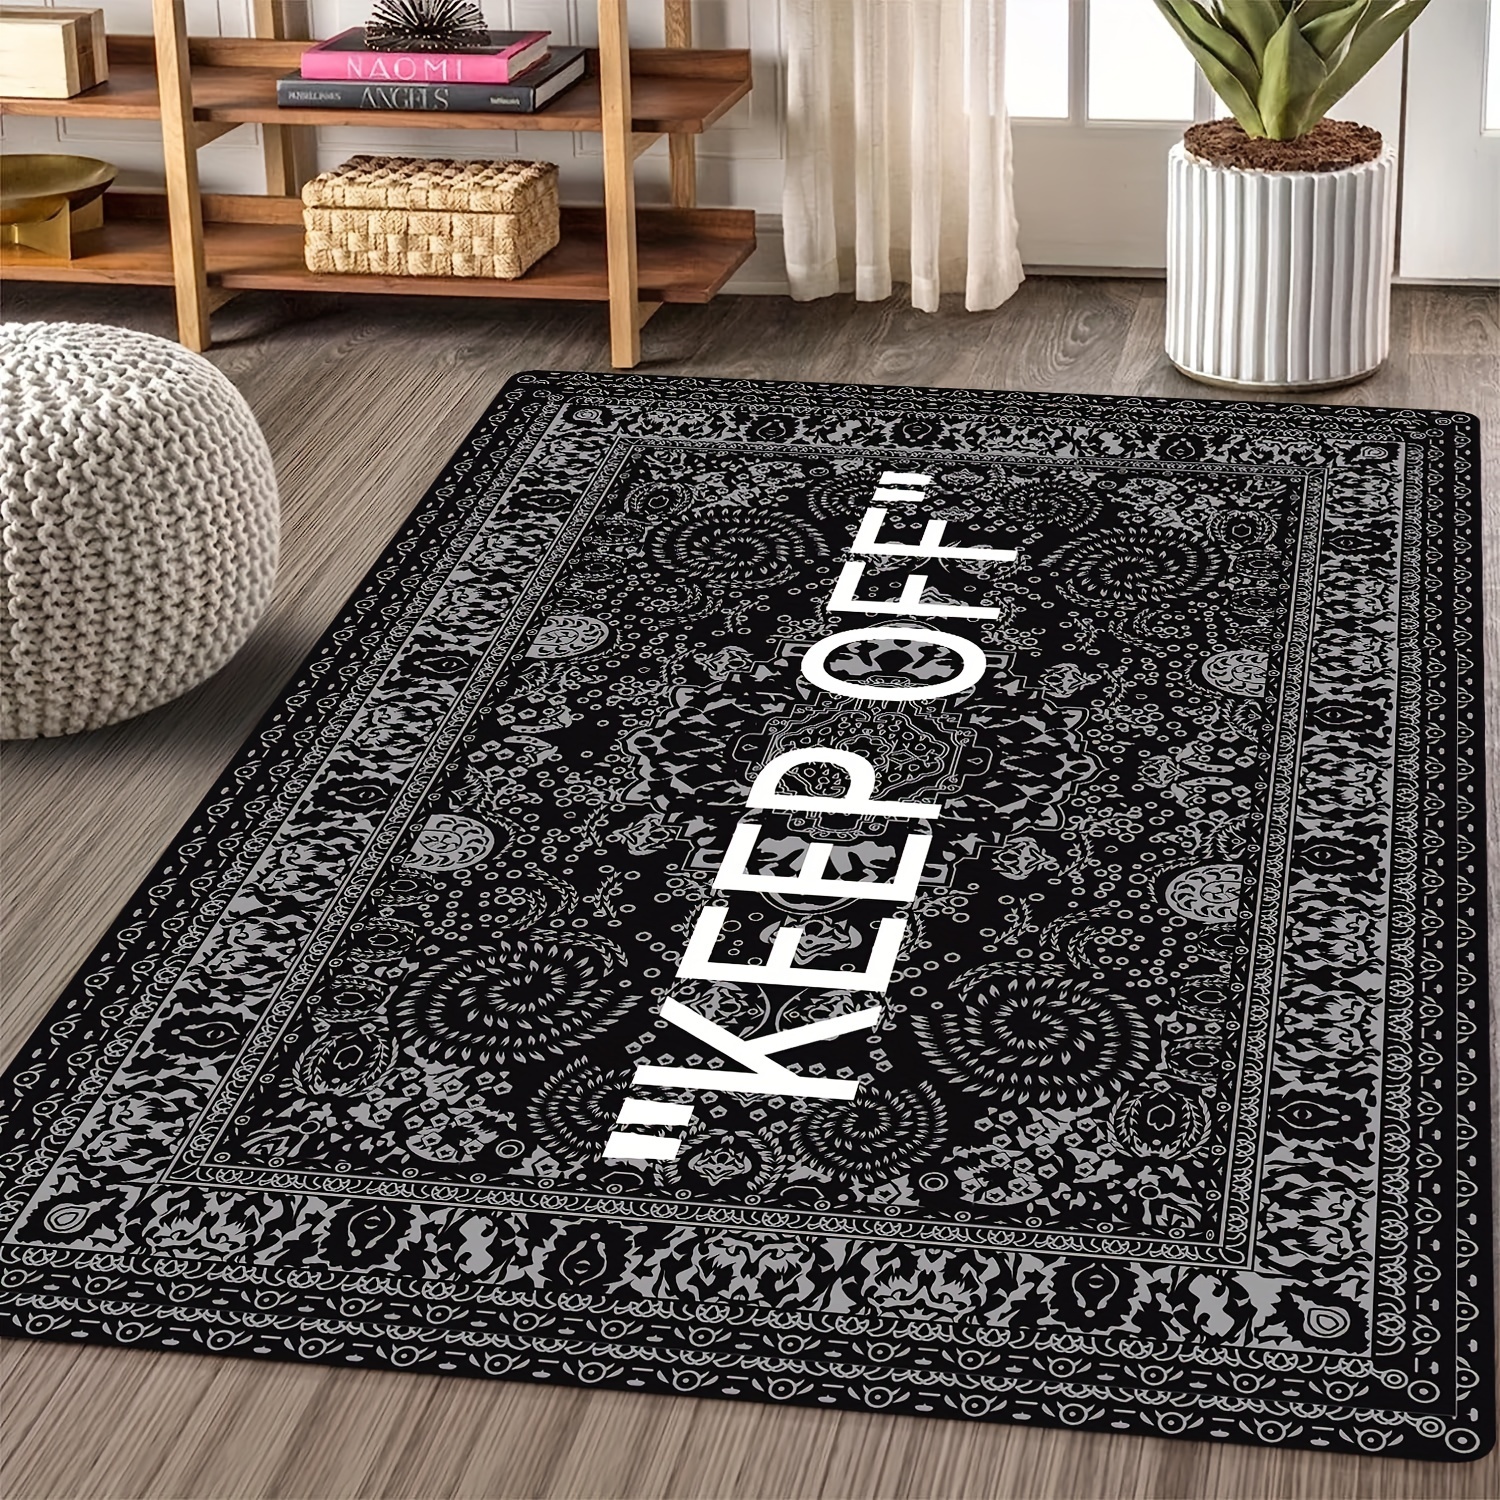 keep Off Black And White Non-slip Resistant Rug, Machine Washable